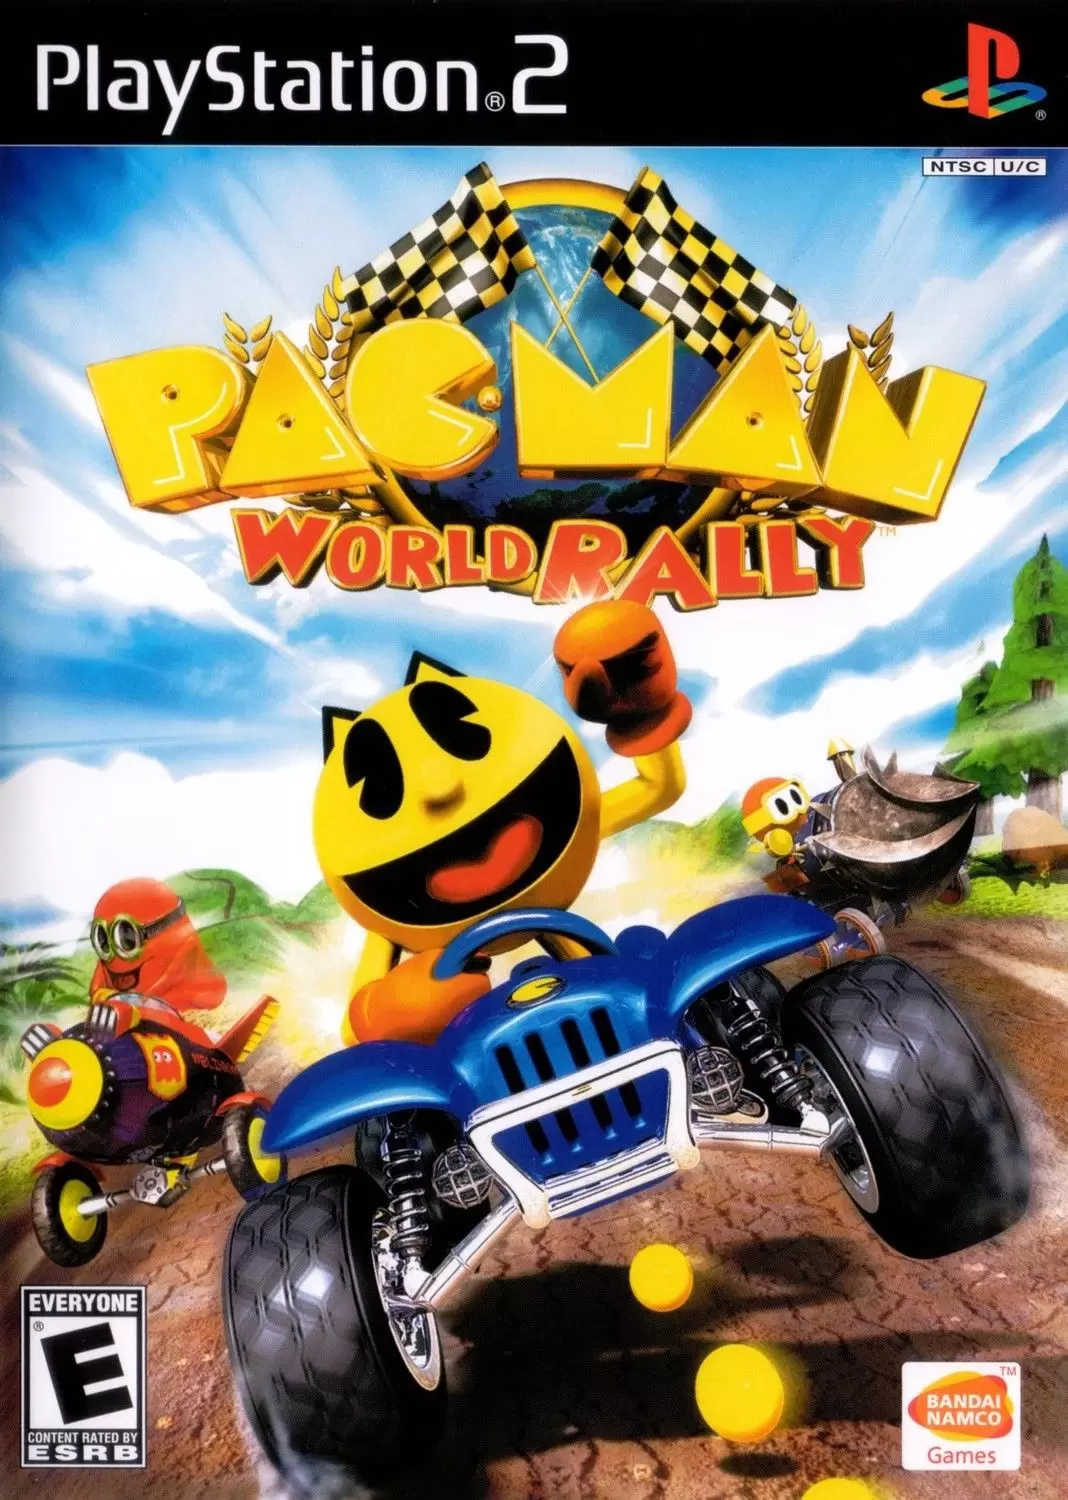 PS2 Games - Pac-Man World Rally